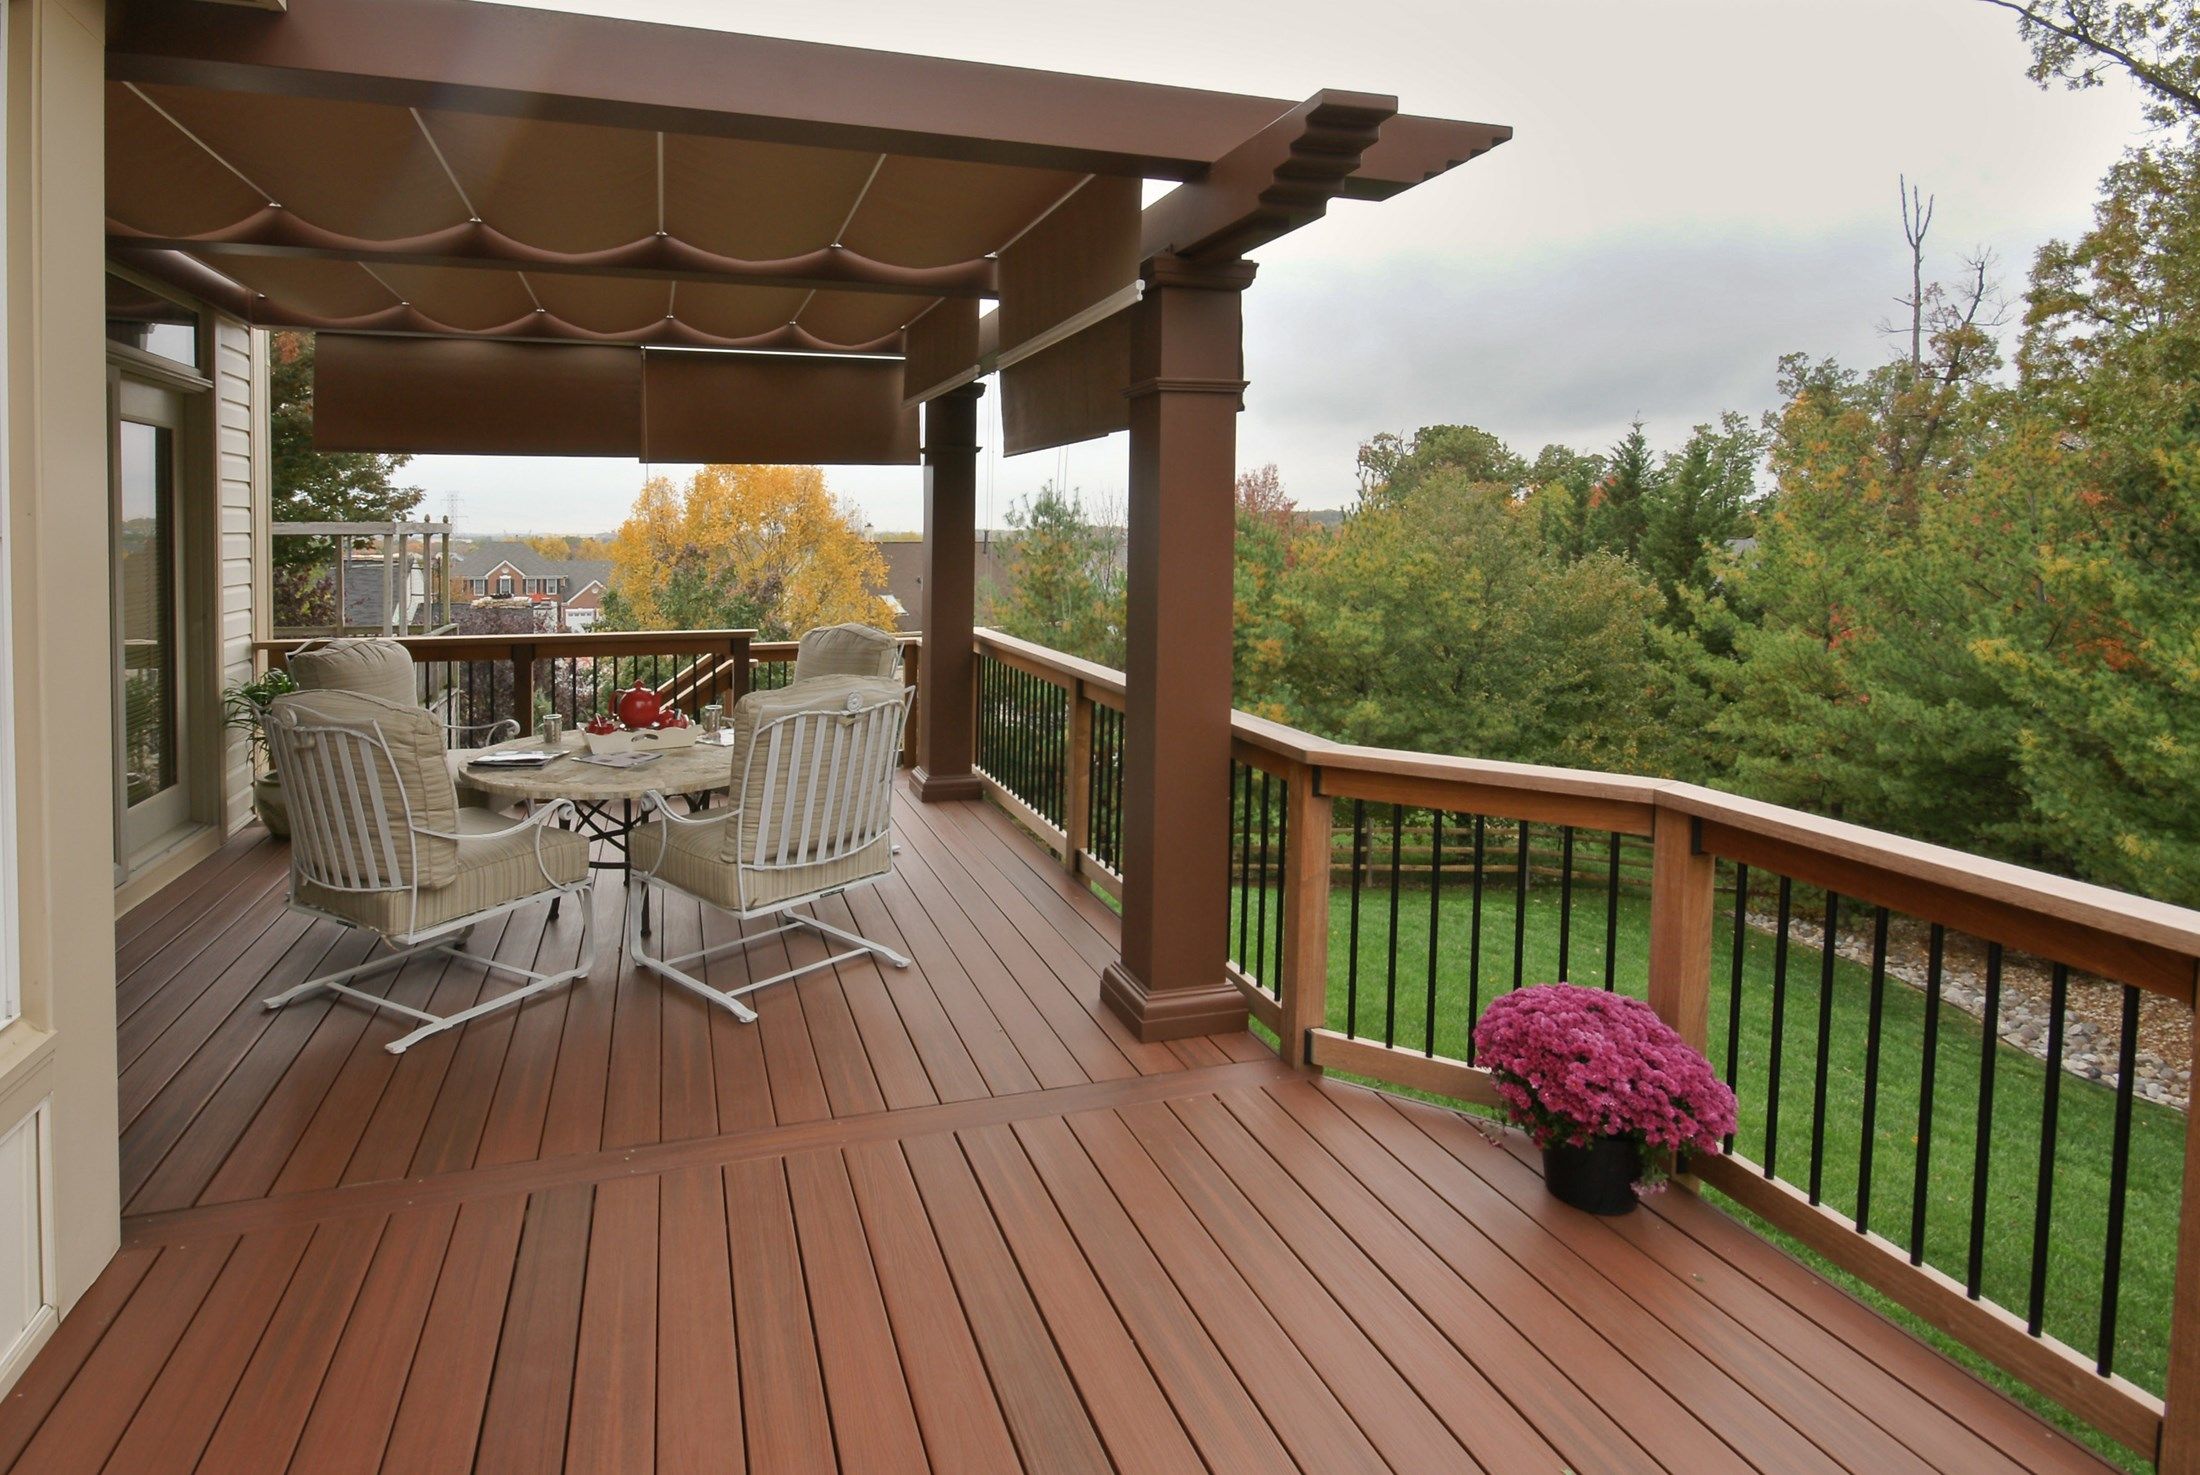 Second Story Deck Ideas Designs And Pictures